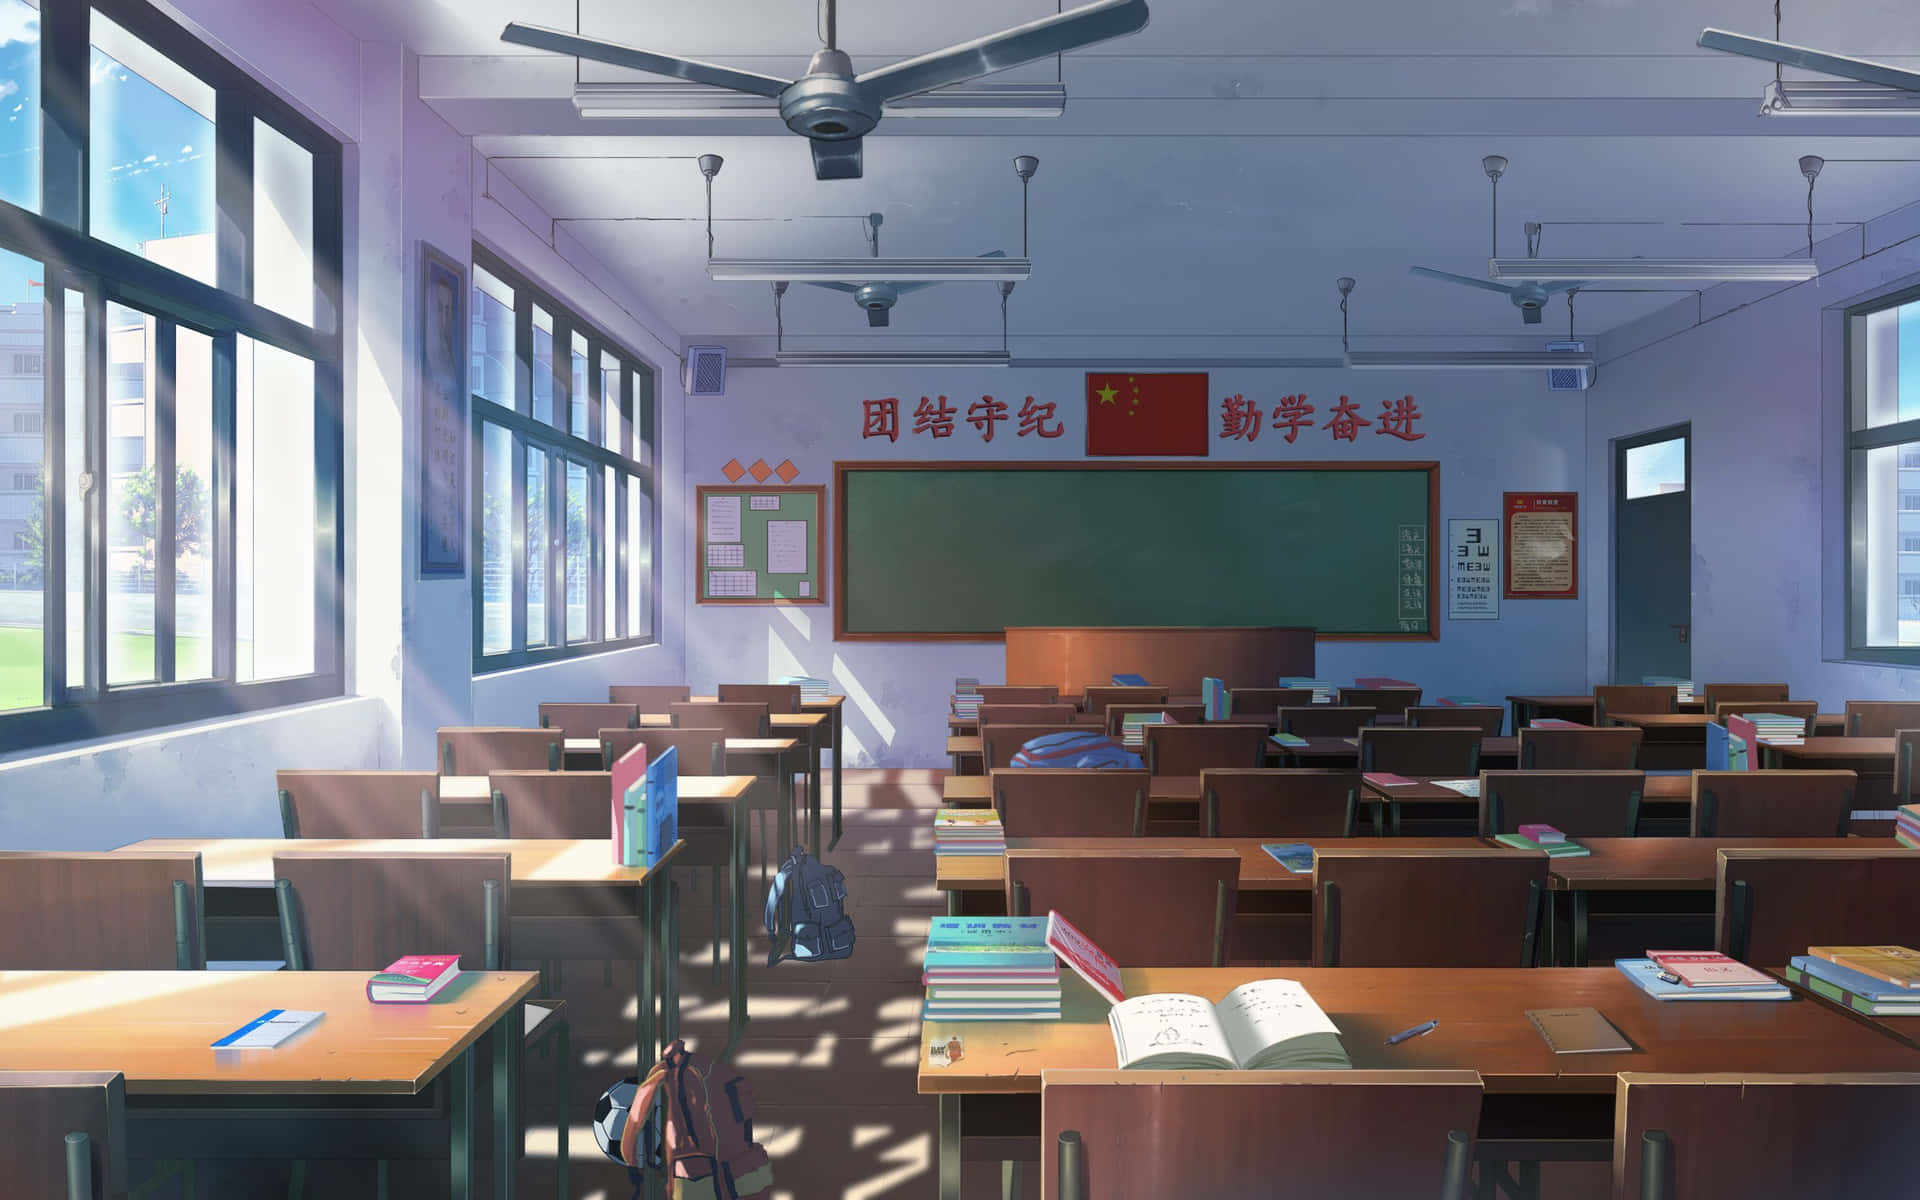 A Classroom With Desks And Books